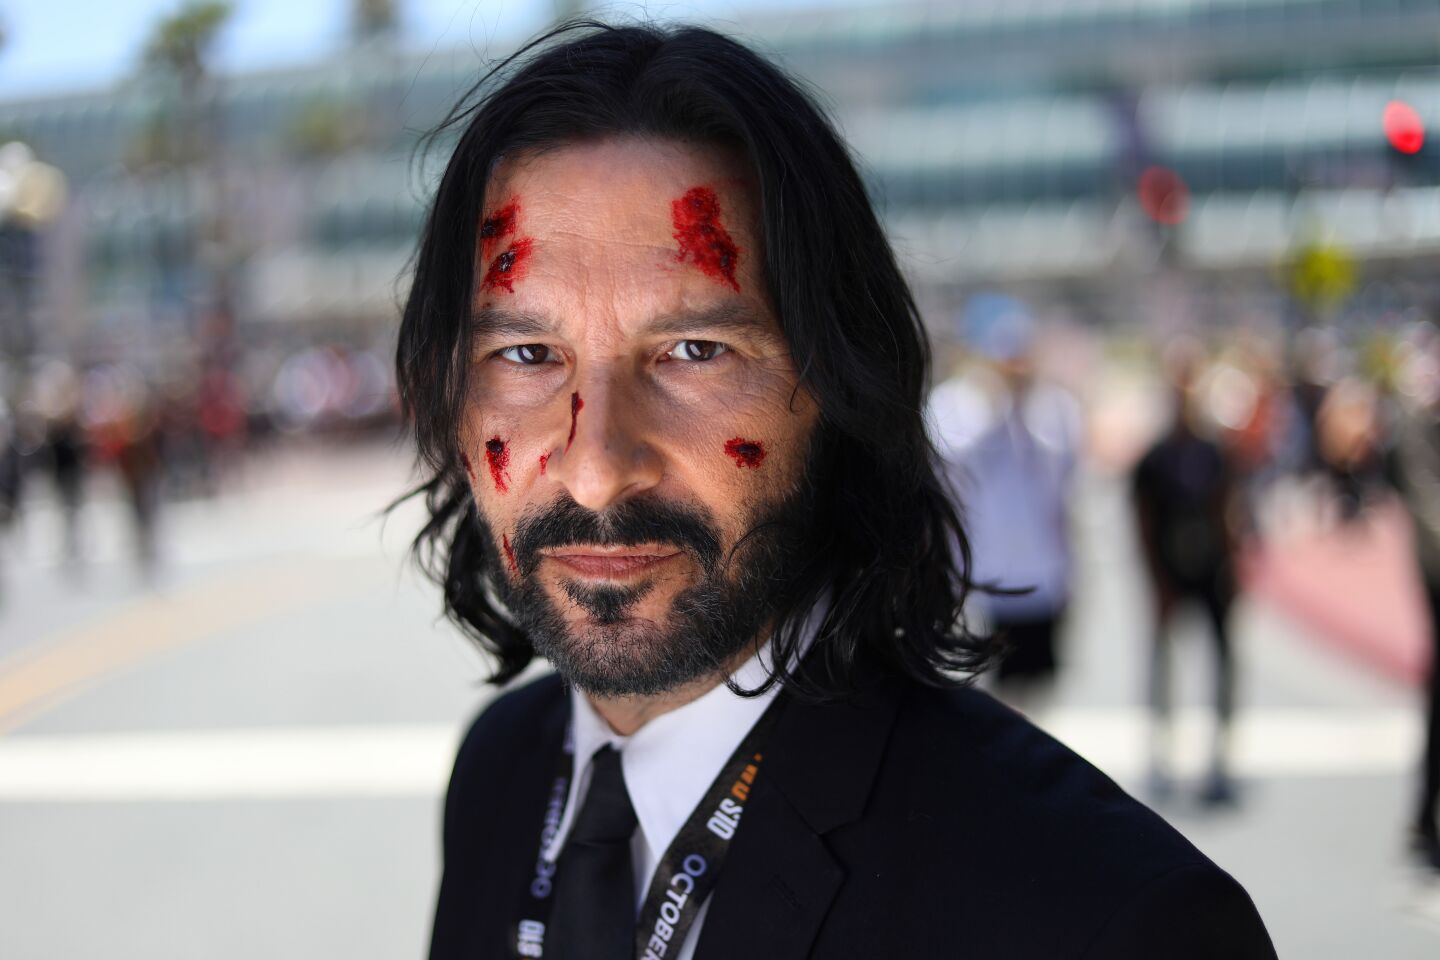 Rudy Keith of Albuquerque dressed as John Wick at Comic Con International.